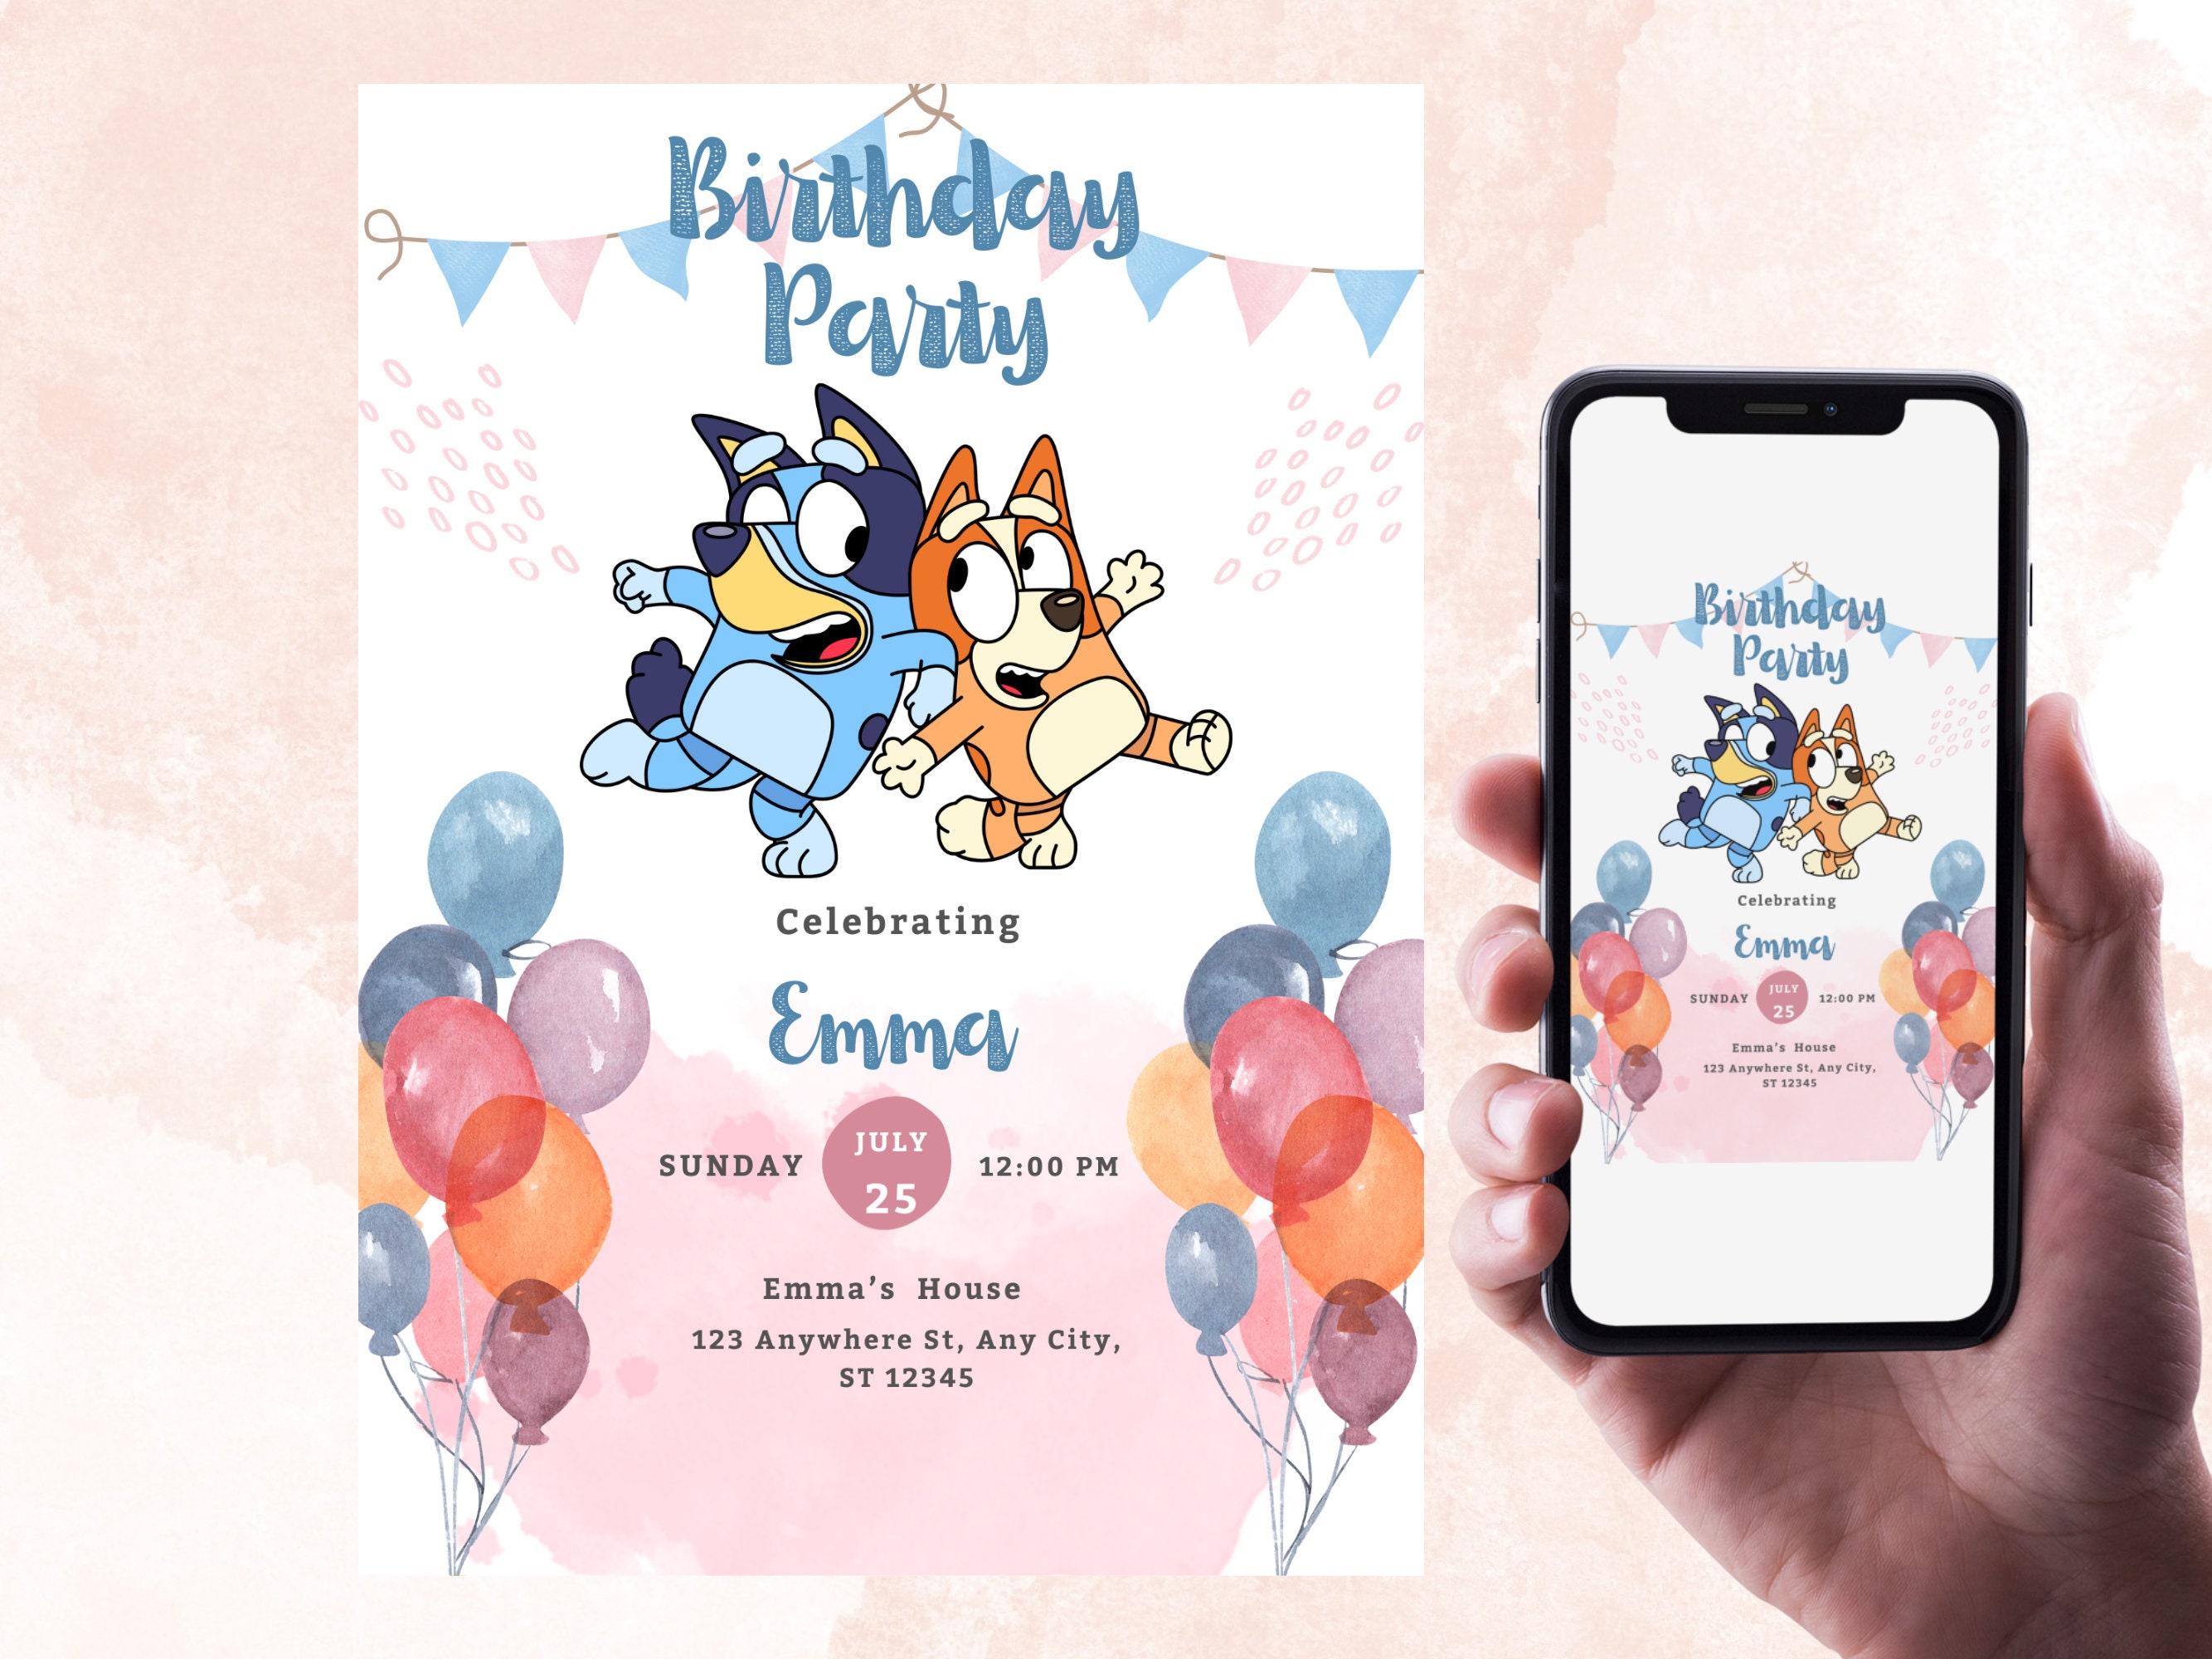 Unique Bluey Birthday Party Supplies | Bluey Party Supplies | Bluey  Birthday Decorations | Bluey Party Decorations | With Bluey Balloons,  Banner